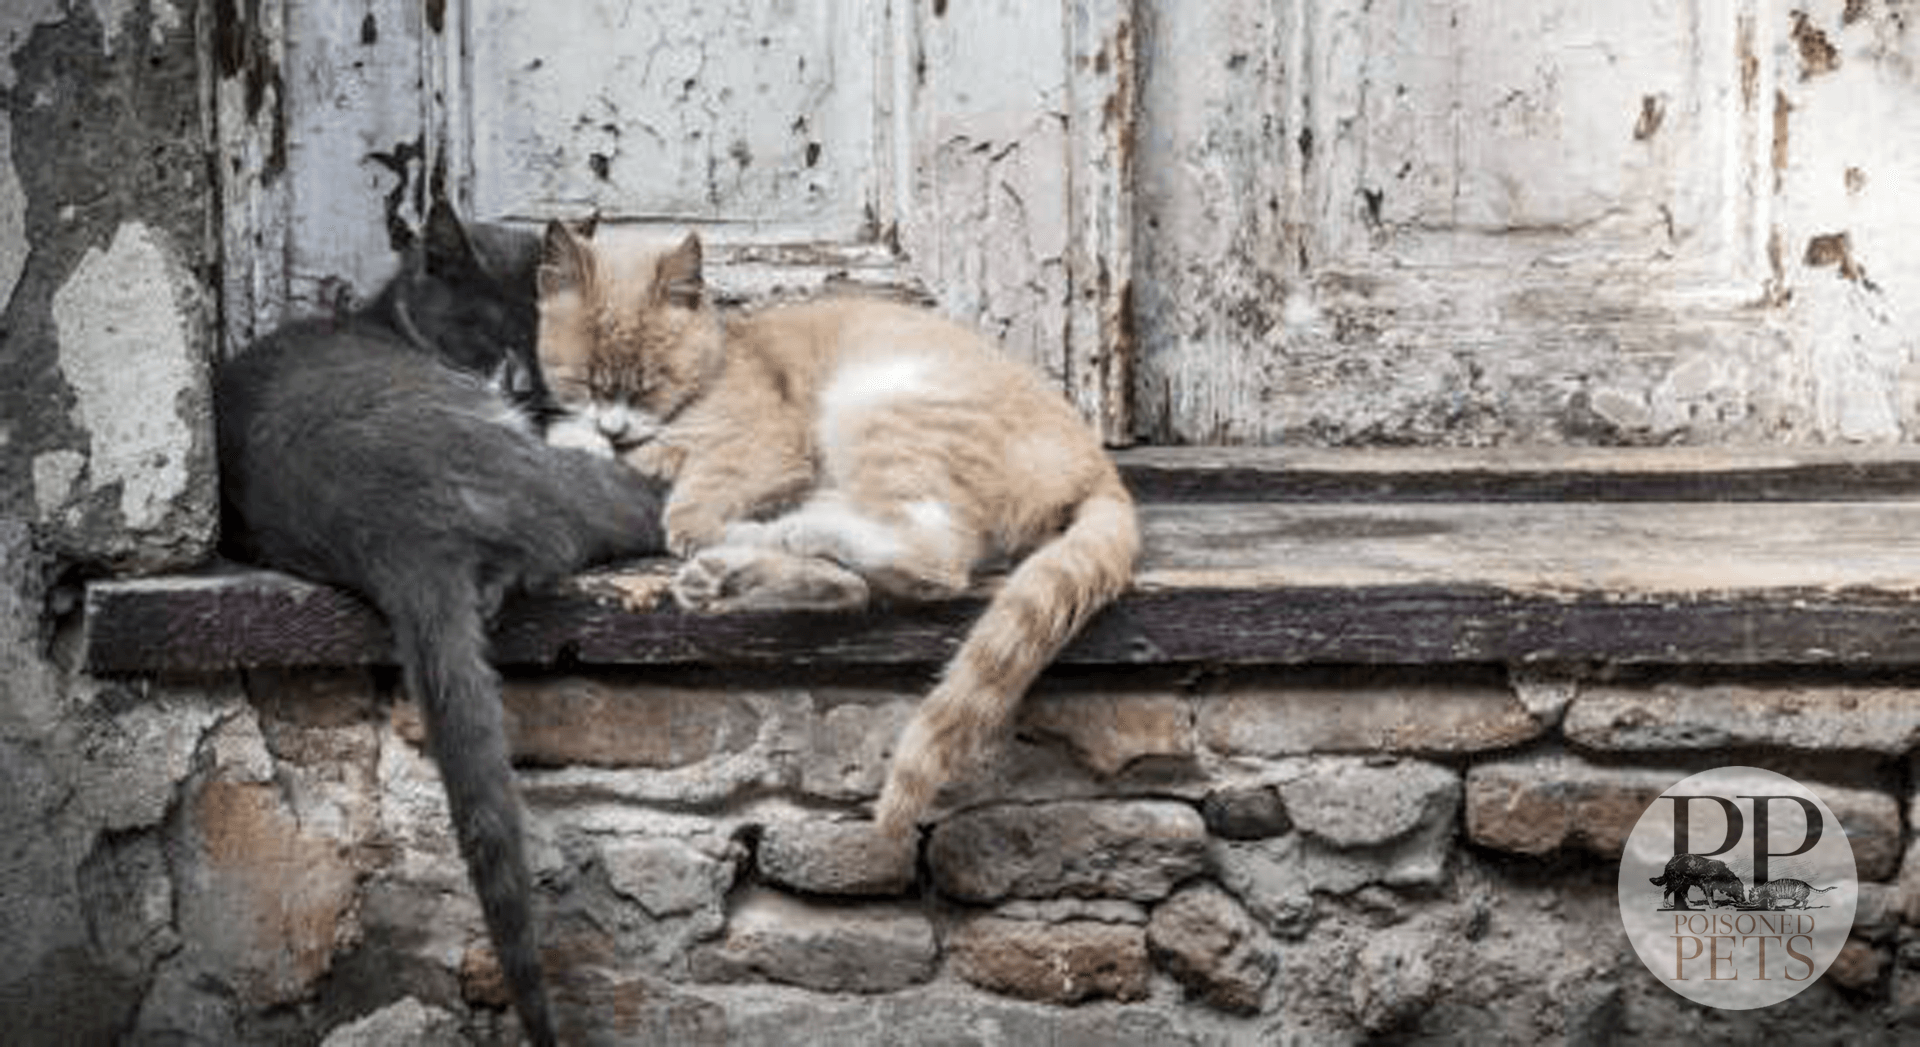 cats-snuggling-poisoned-pets-petfoodsafetynews-cat-food